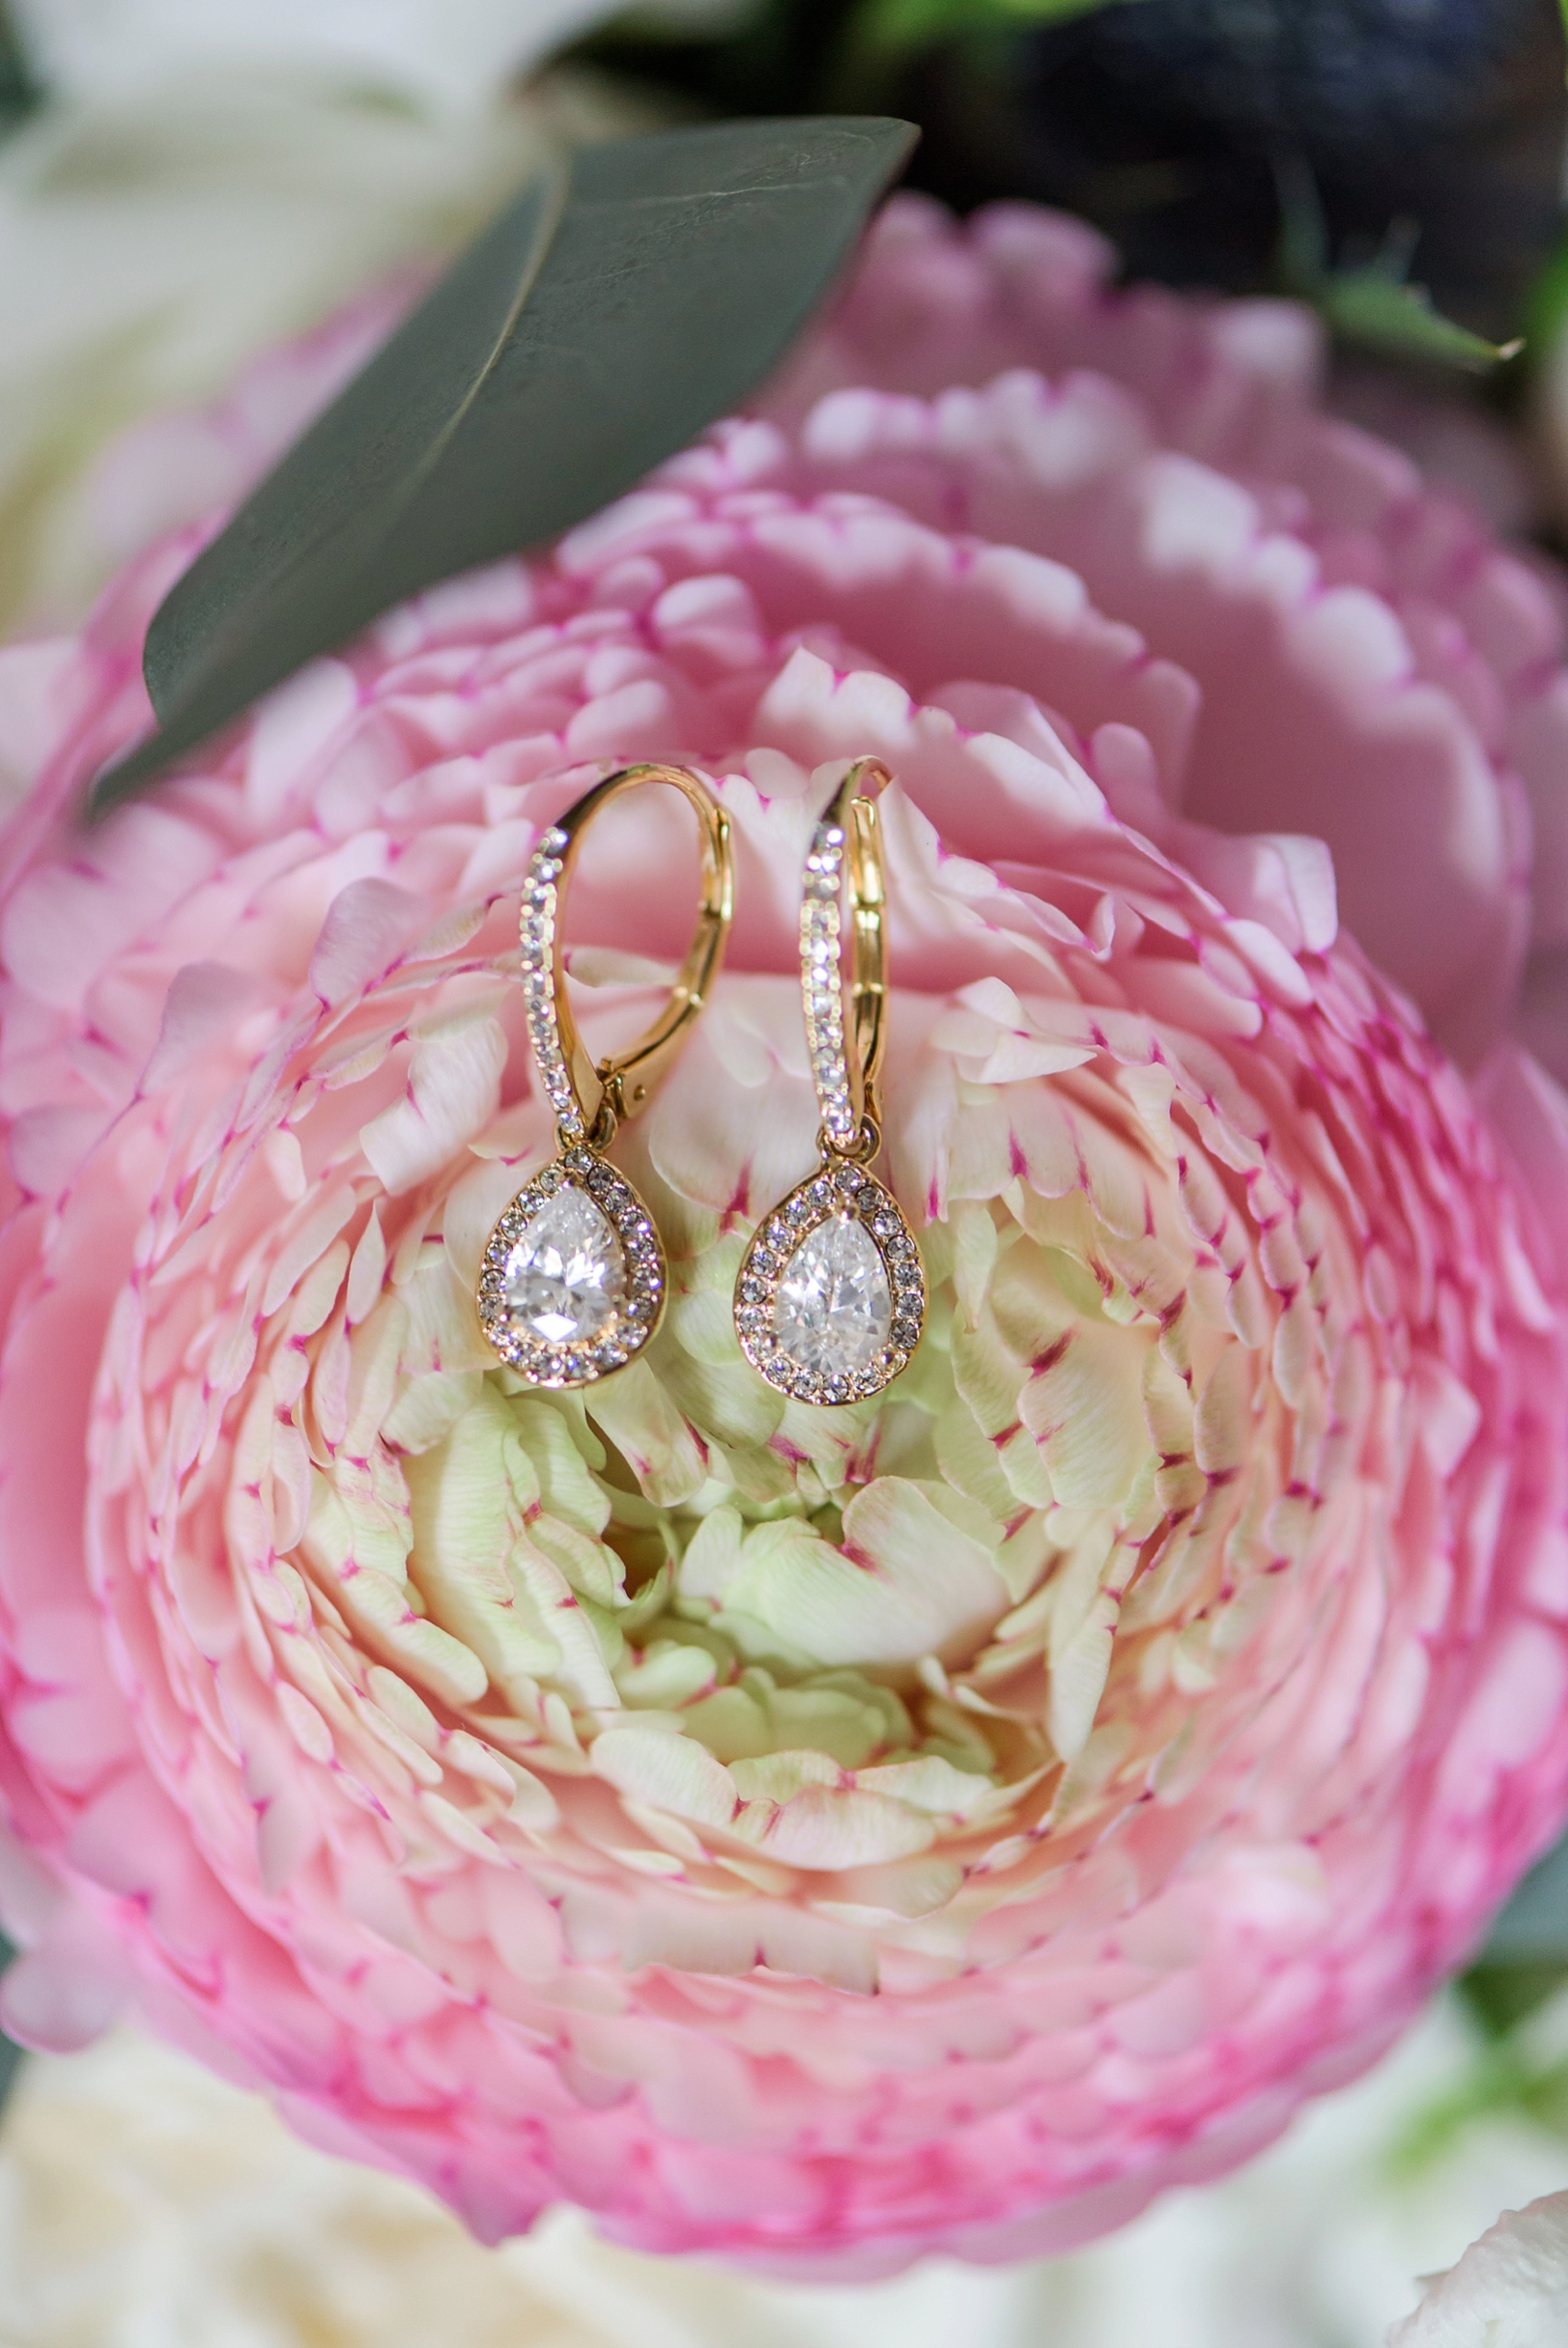 Gold bridal earrings against the floral background of the bouquet